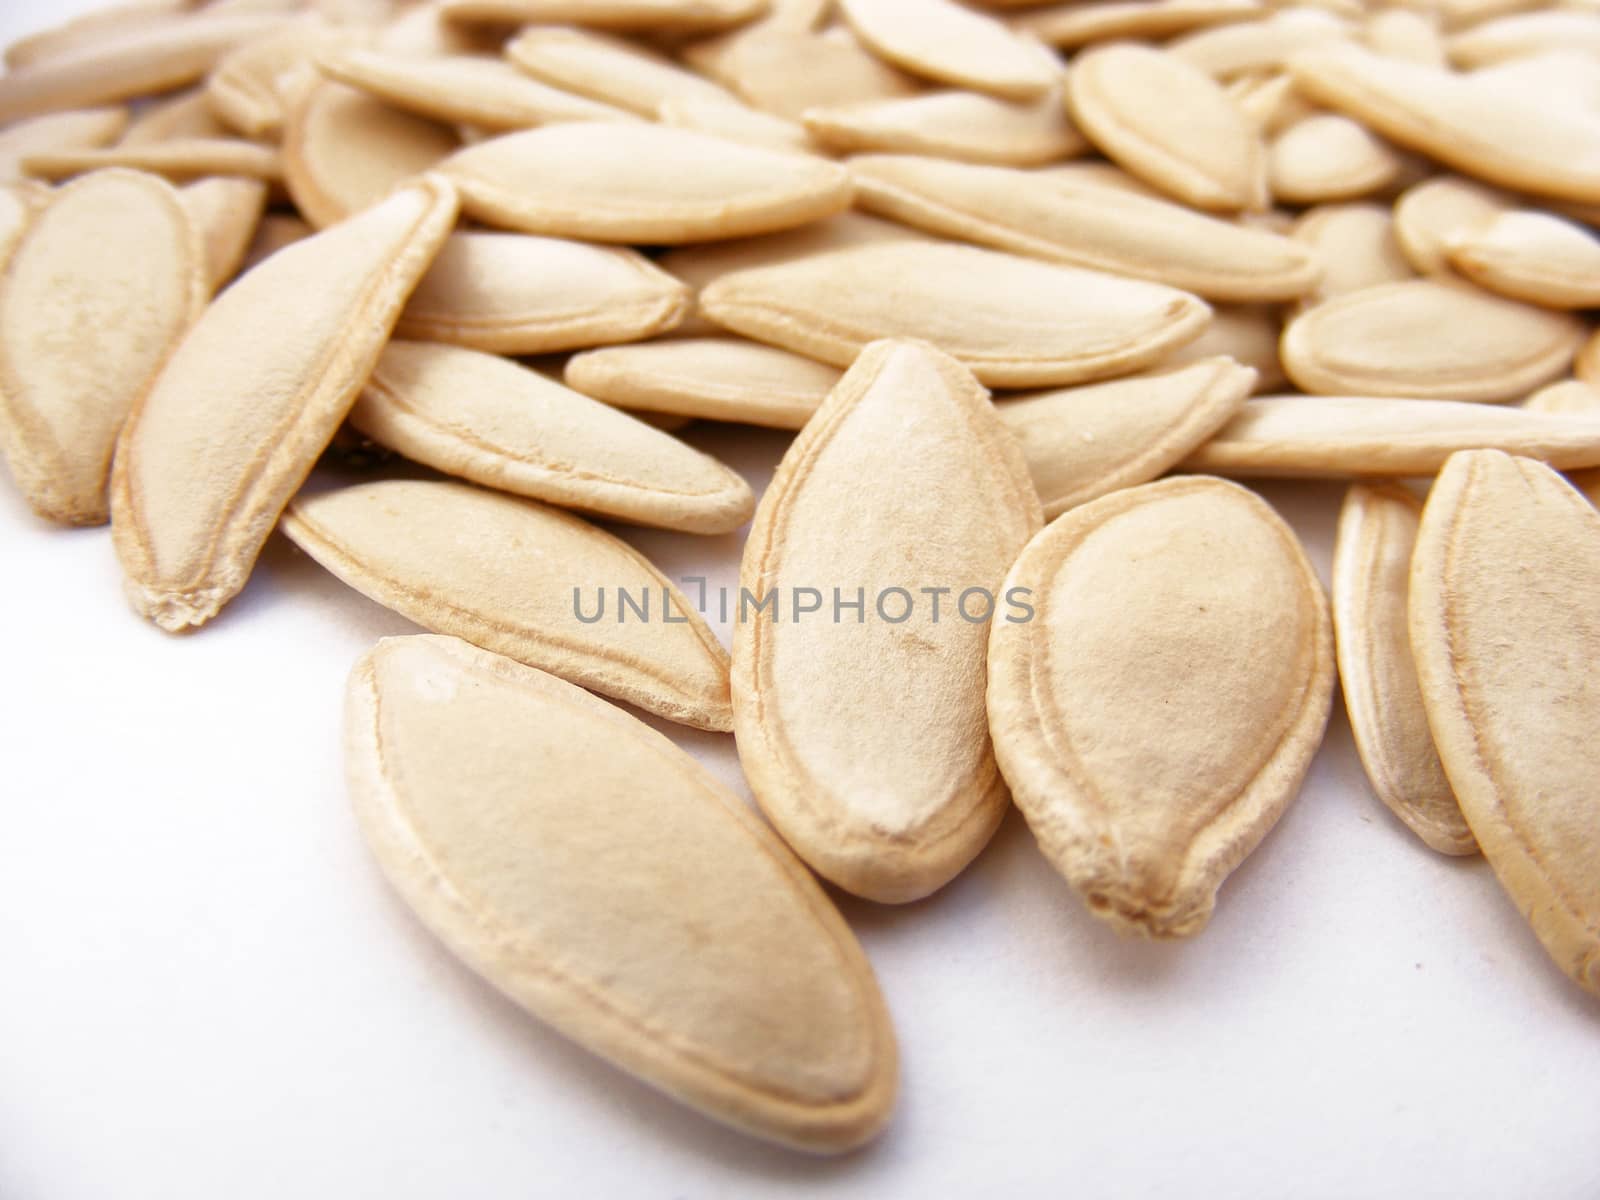 Pictures of the most beautiful and fresh pumpkin seeds by nhatipoglu